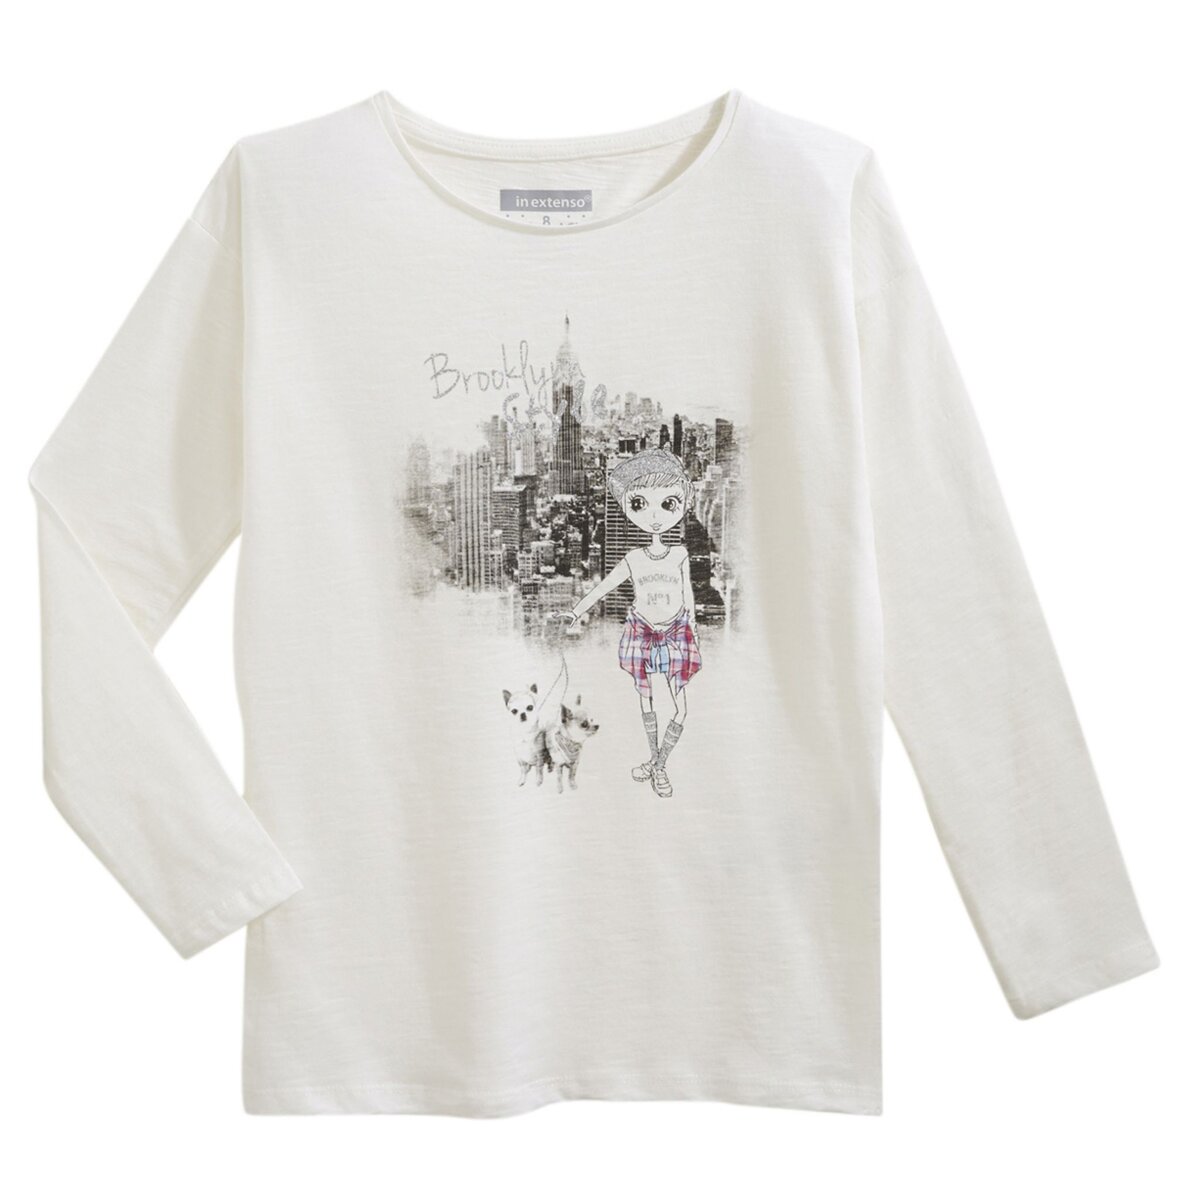 IN EXTENSO Tee-shirt manches longues avec fentes fille